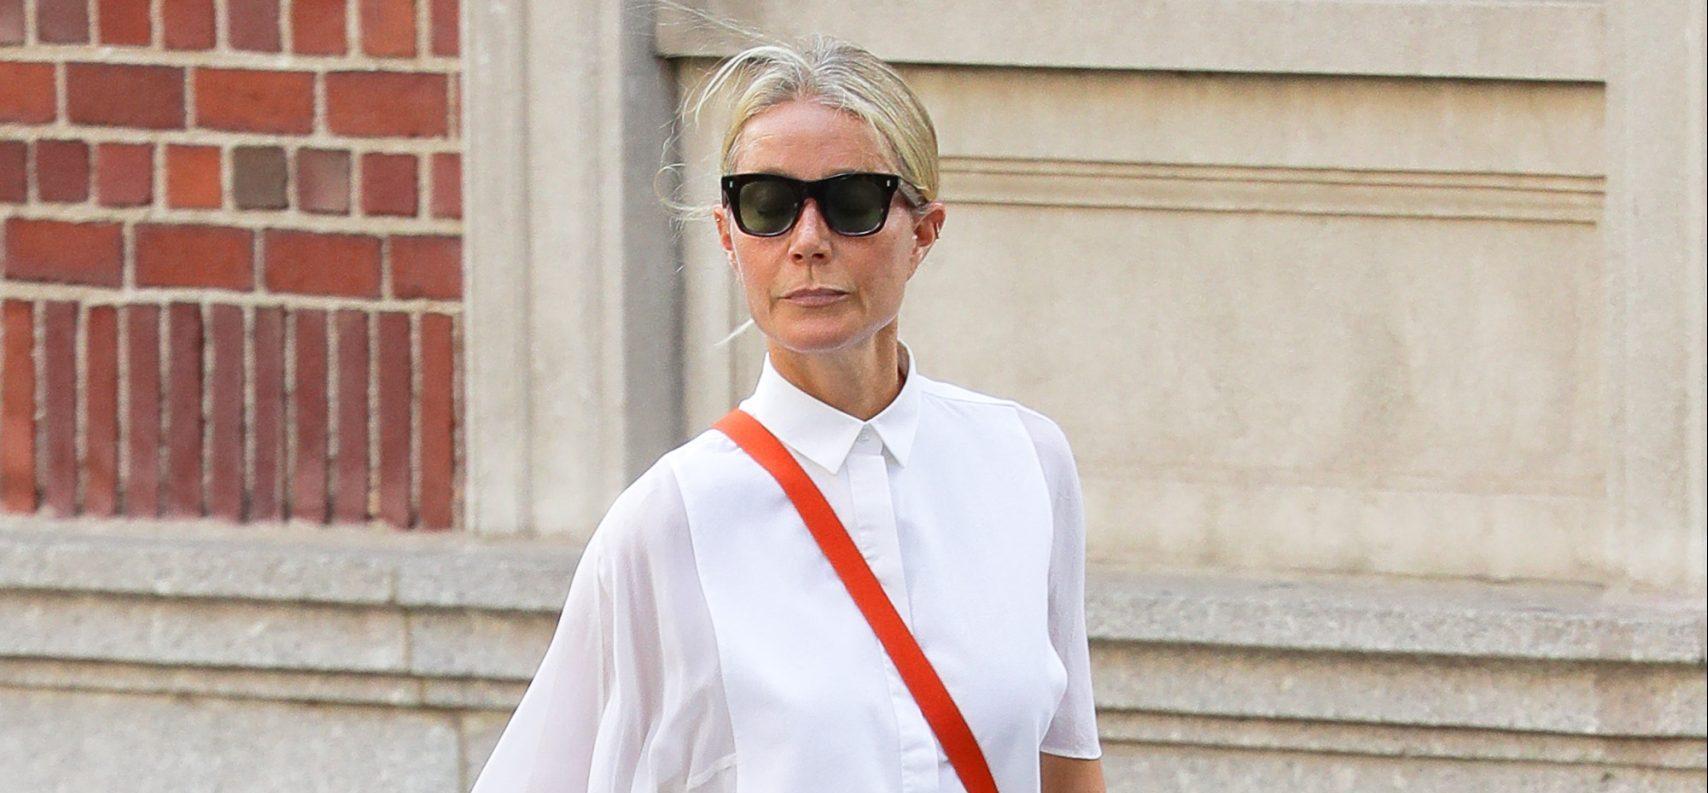 Gwyneth Paltrow was spotted out and about in New York City